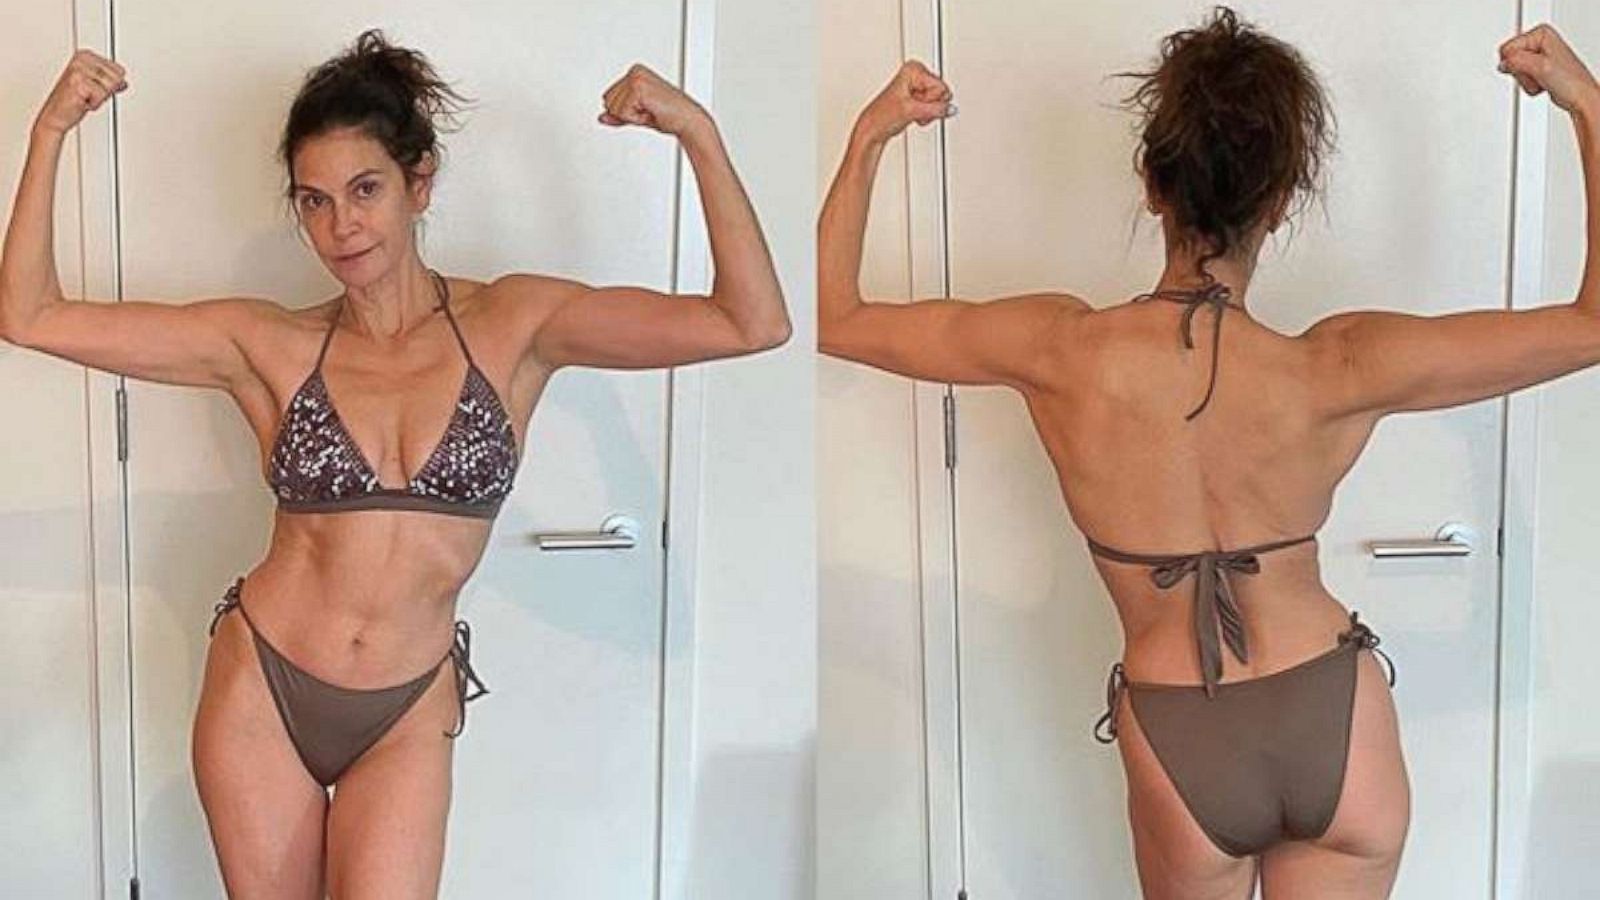 Teri Hatcher shares photo to make a point about aging and loving your body 